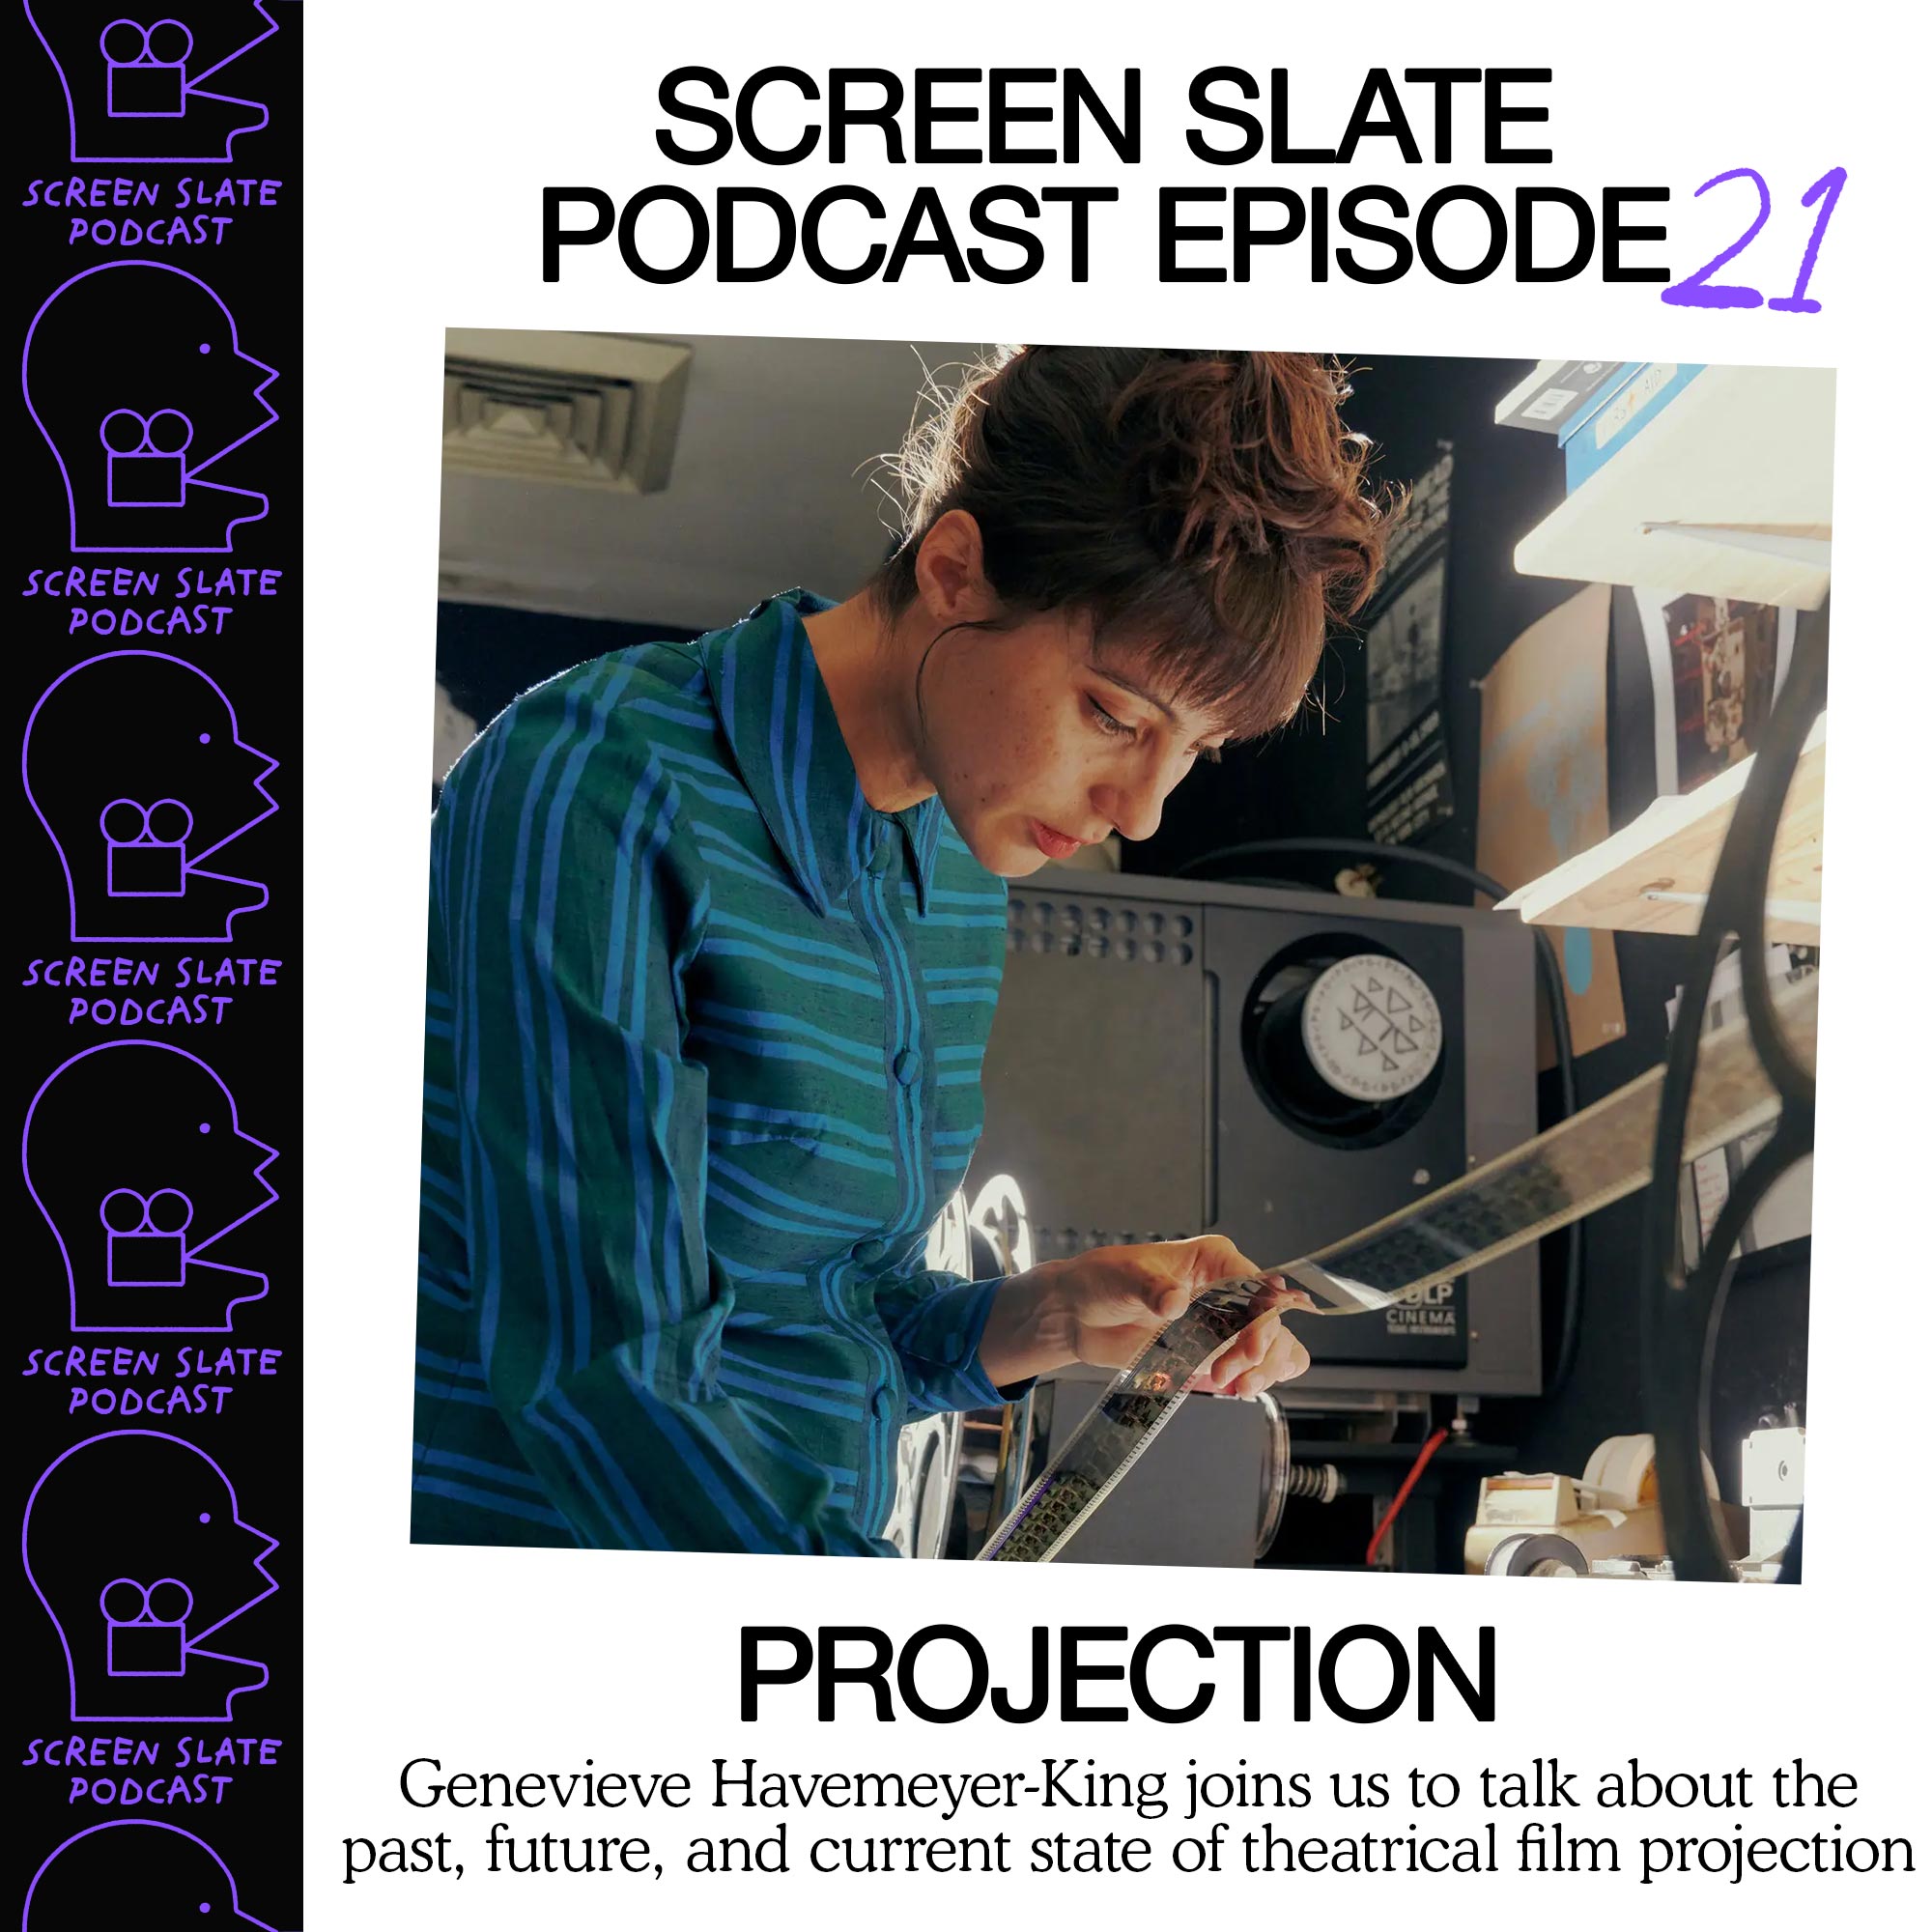 Episode 21 - Projection with Genevieve Havemeyer-King